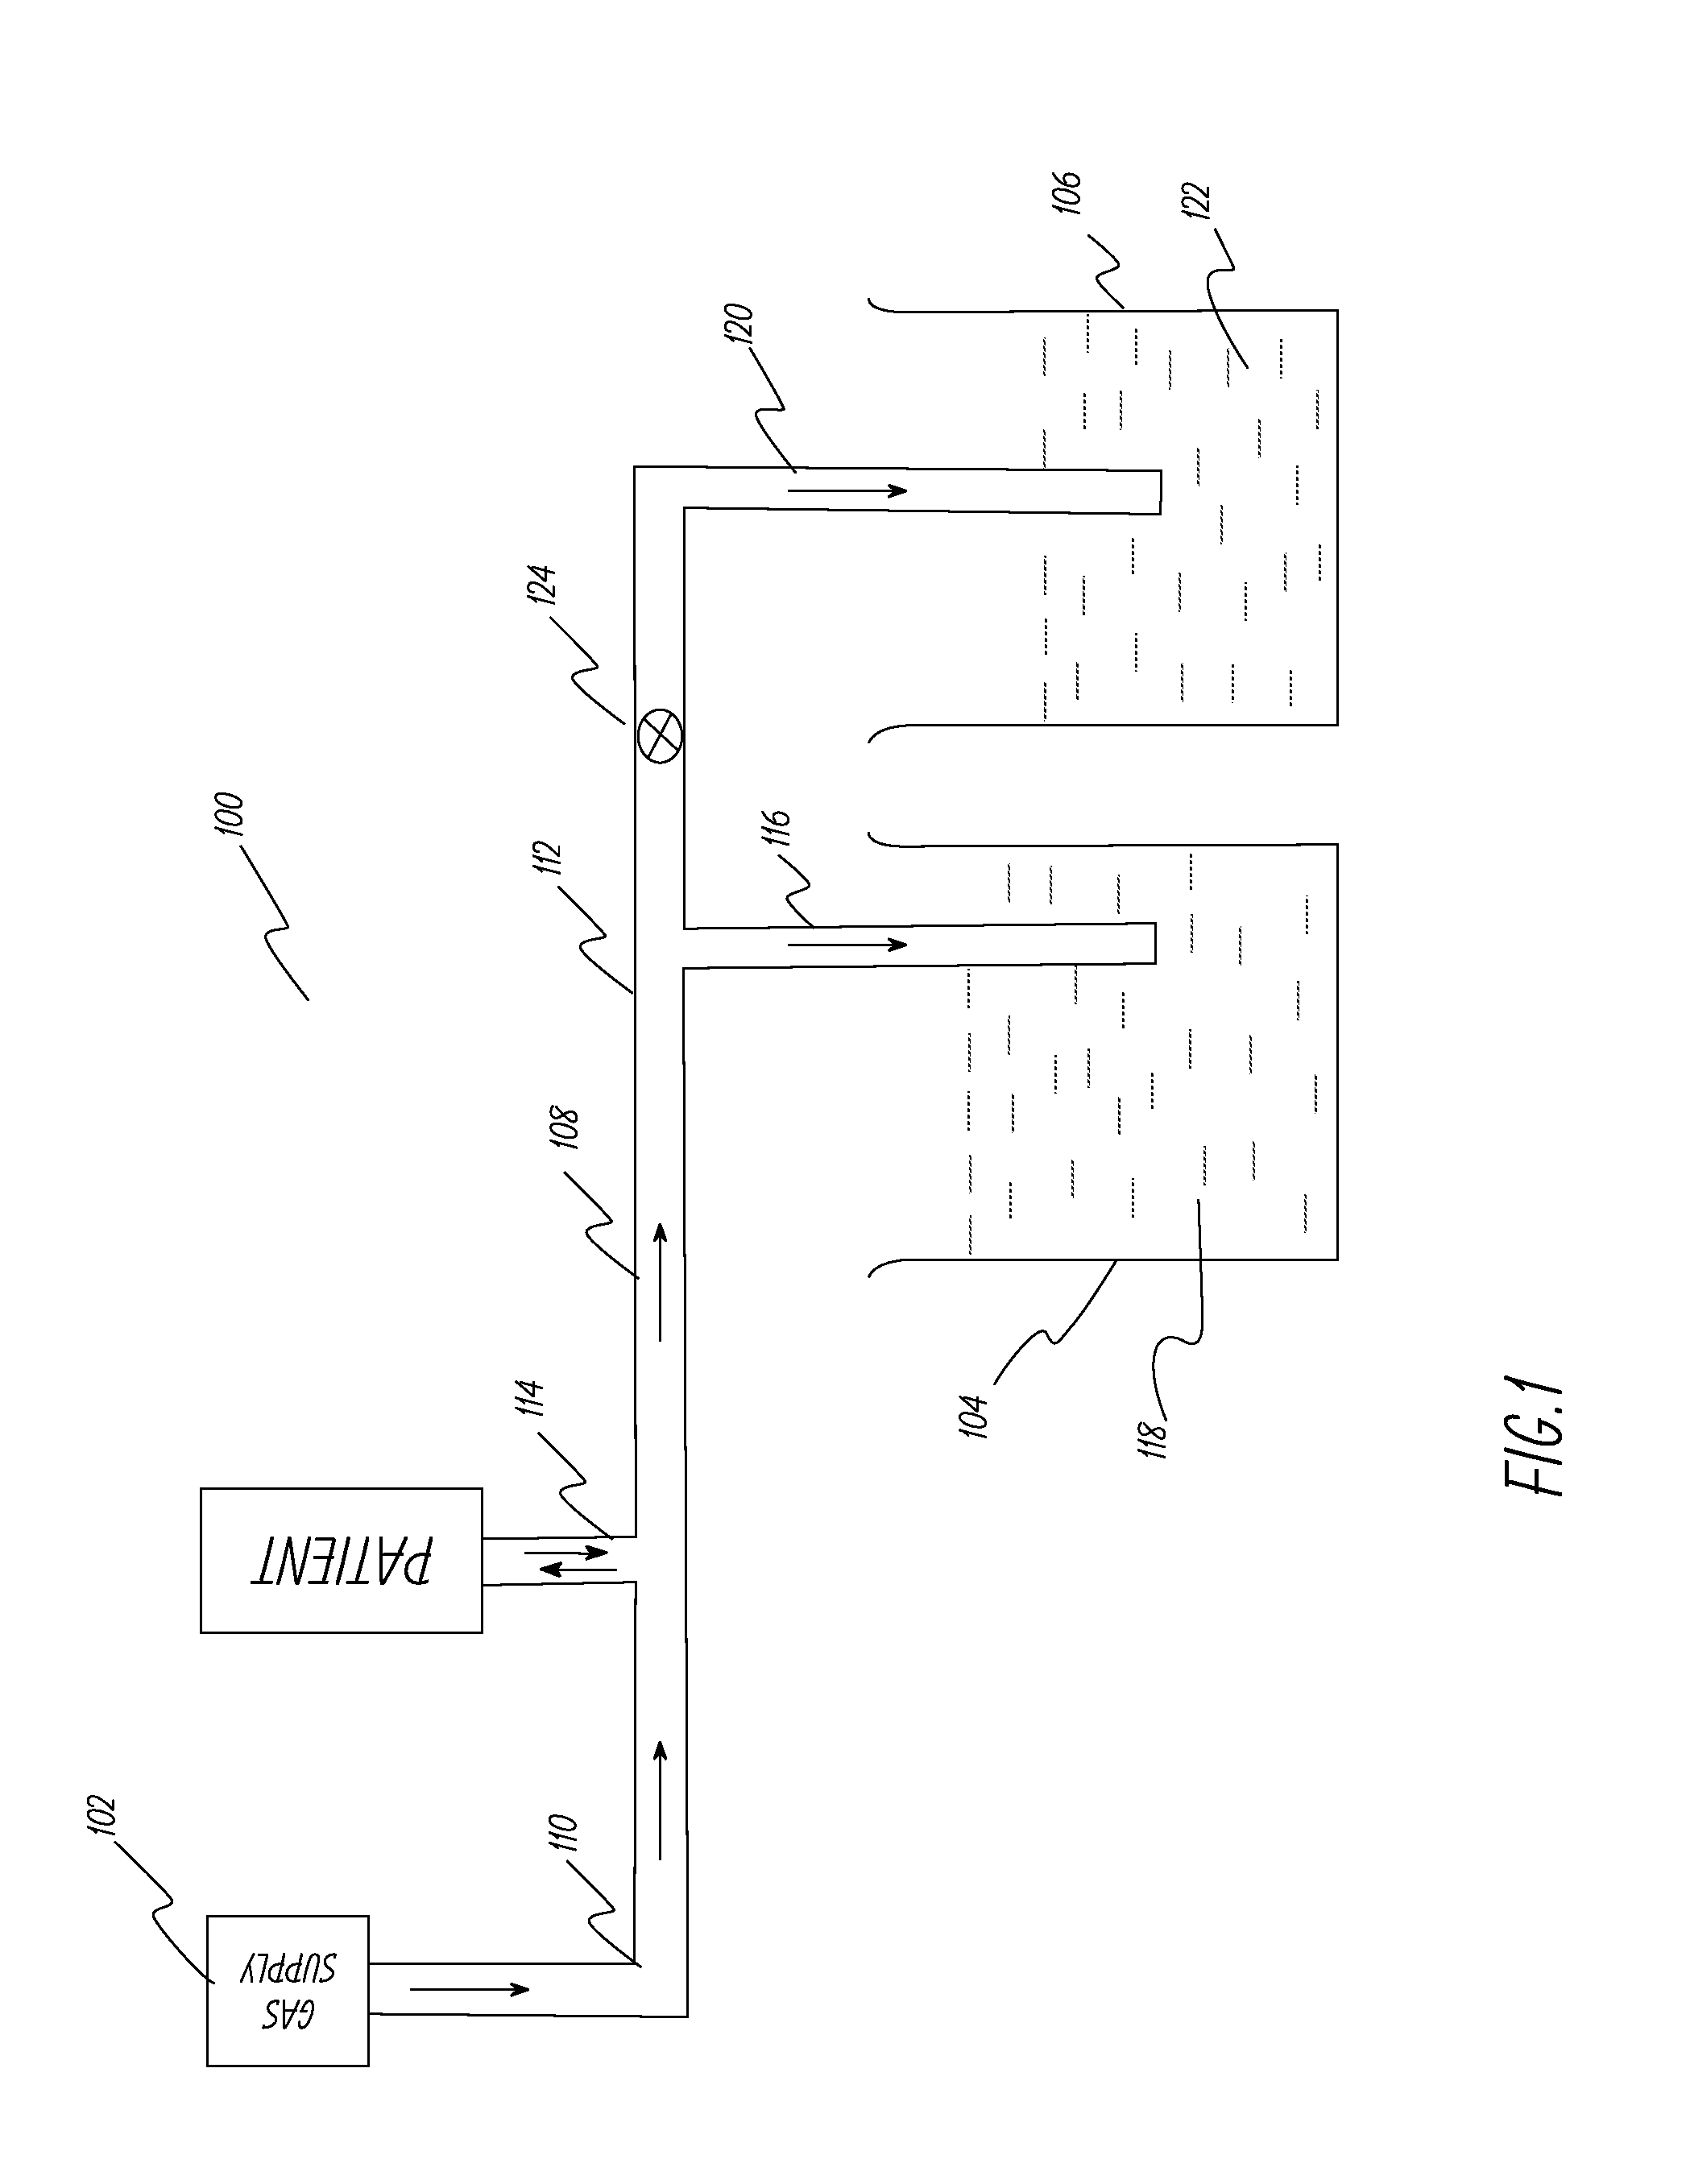 Apparatus and method to provide breathing support